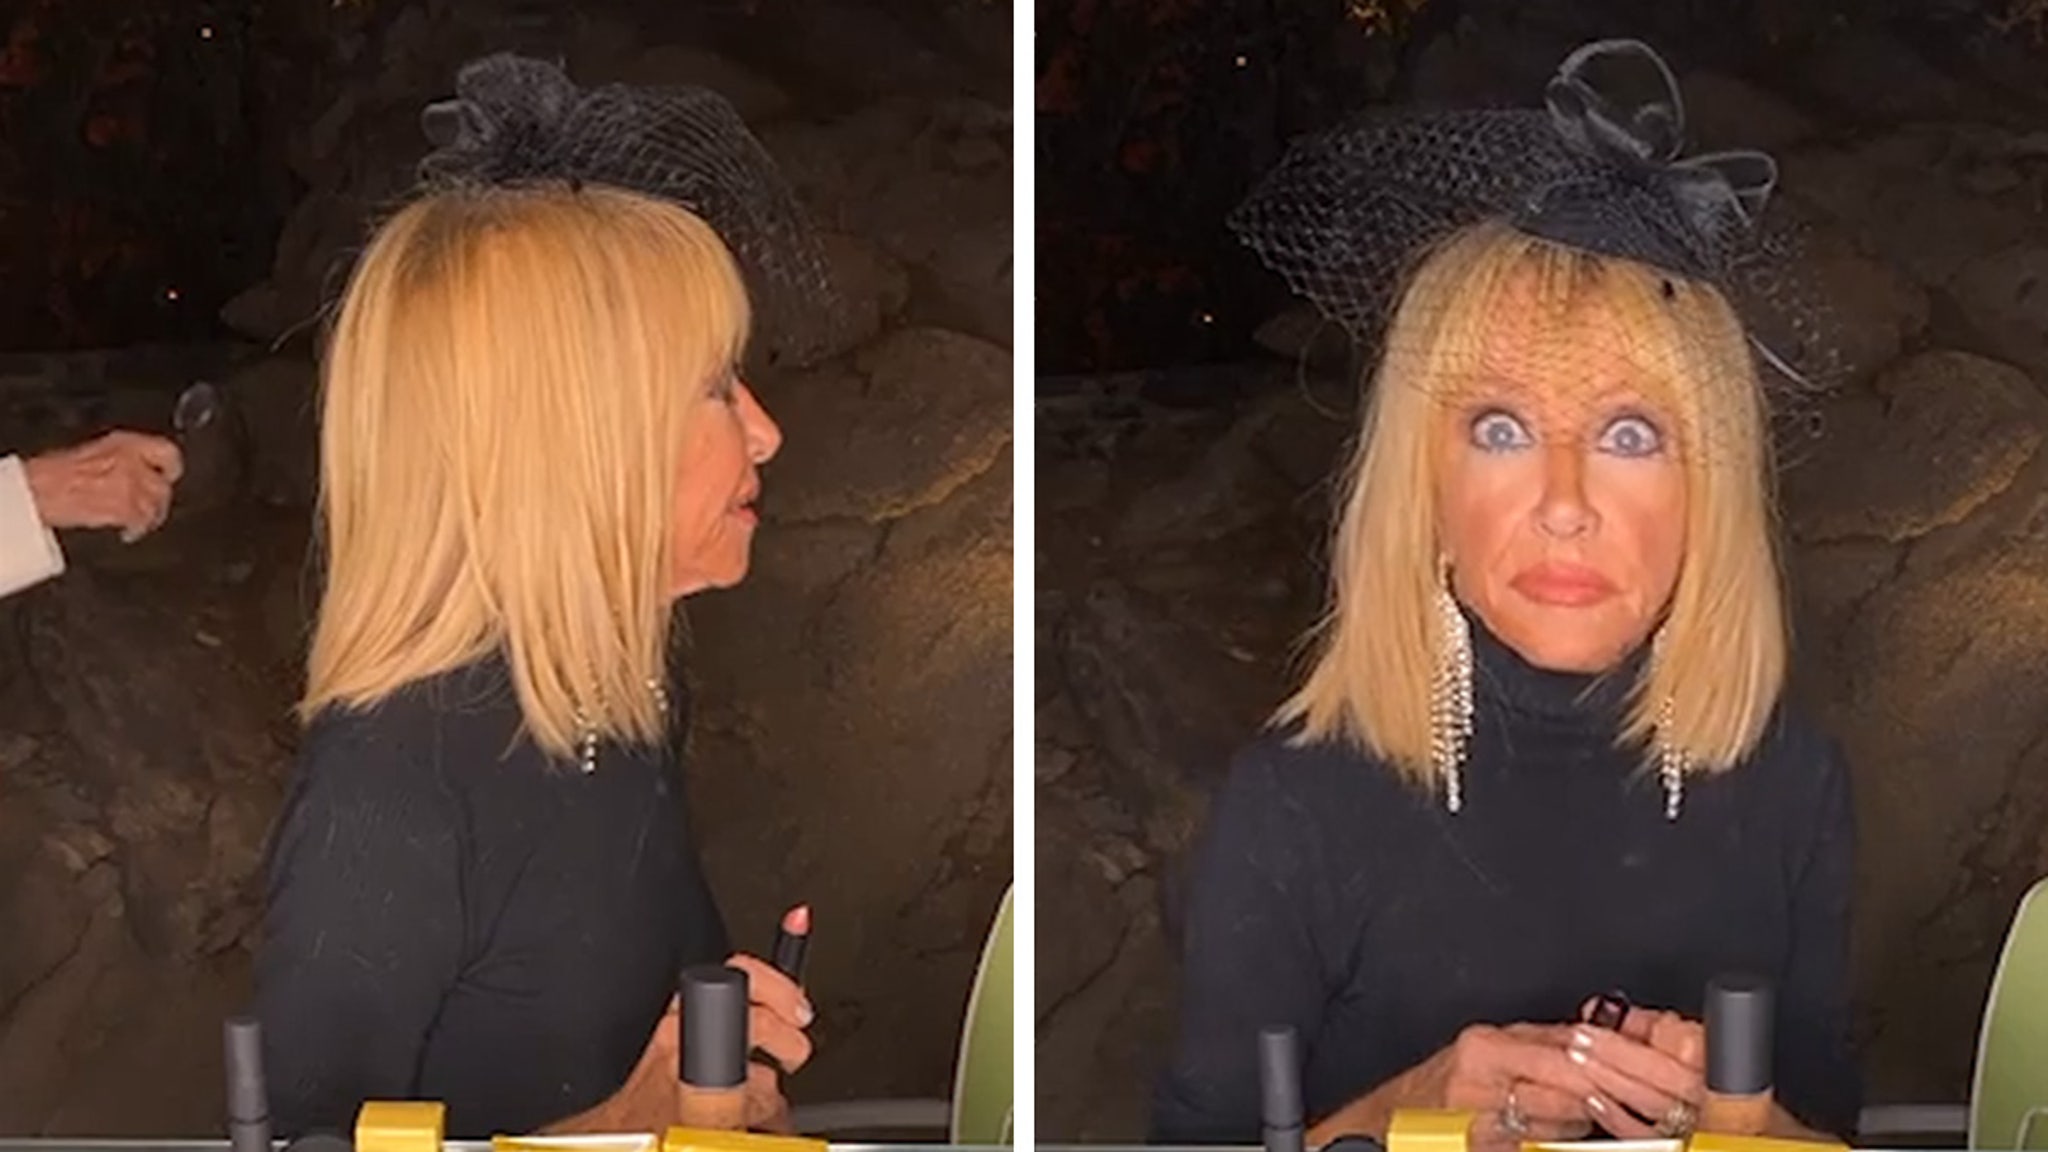 Suzanne Somers’ Makeup live stream hijacked by Home Intruder